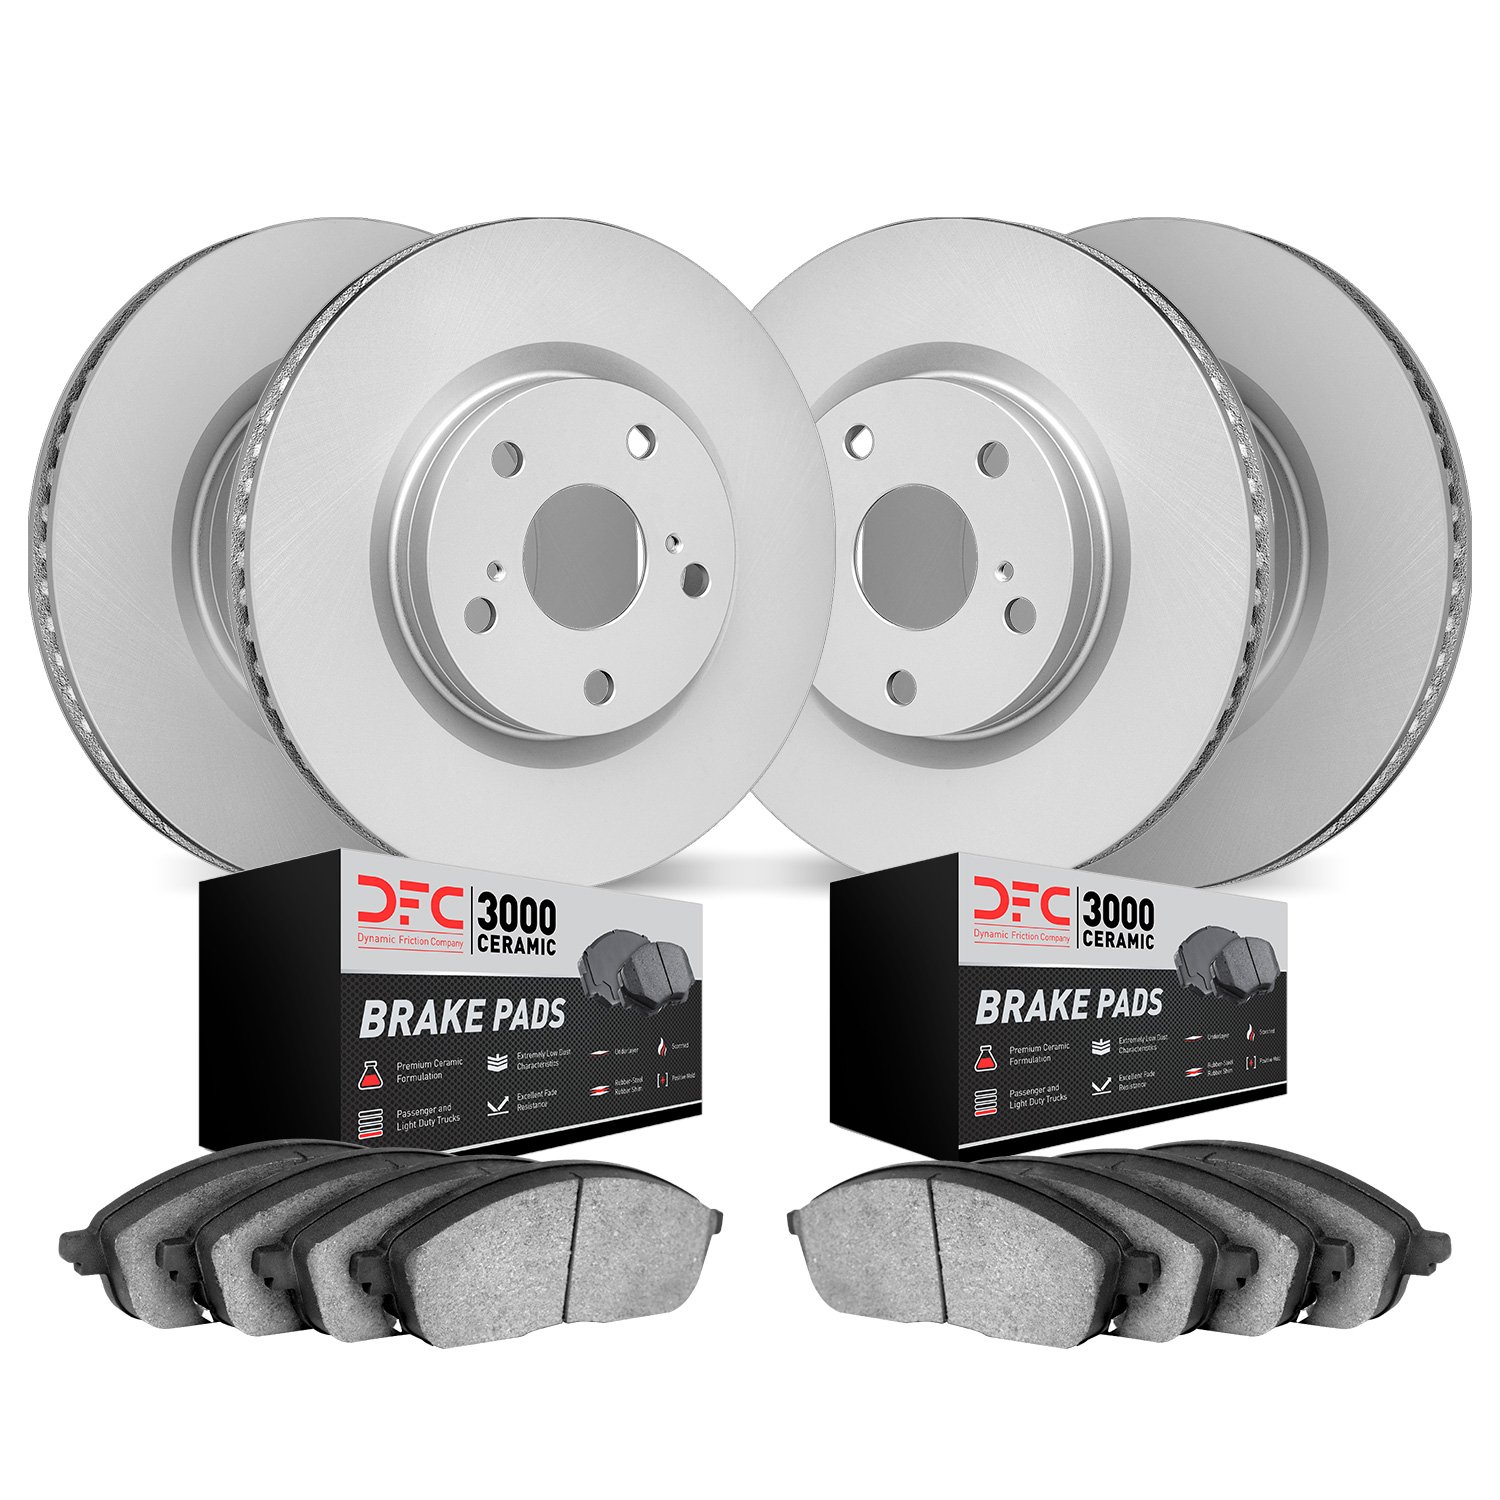 4304-67017 Geospec Brake Rotors with 3000-Series Ceramic Brake Pads Kit, 2005-2020 Infiniti/Nissan, Position: Front and Rear